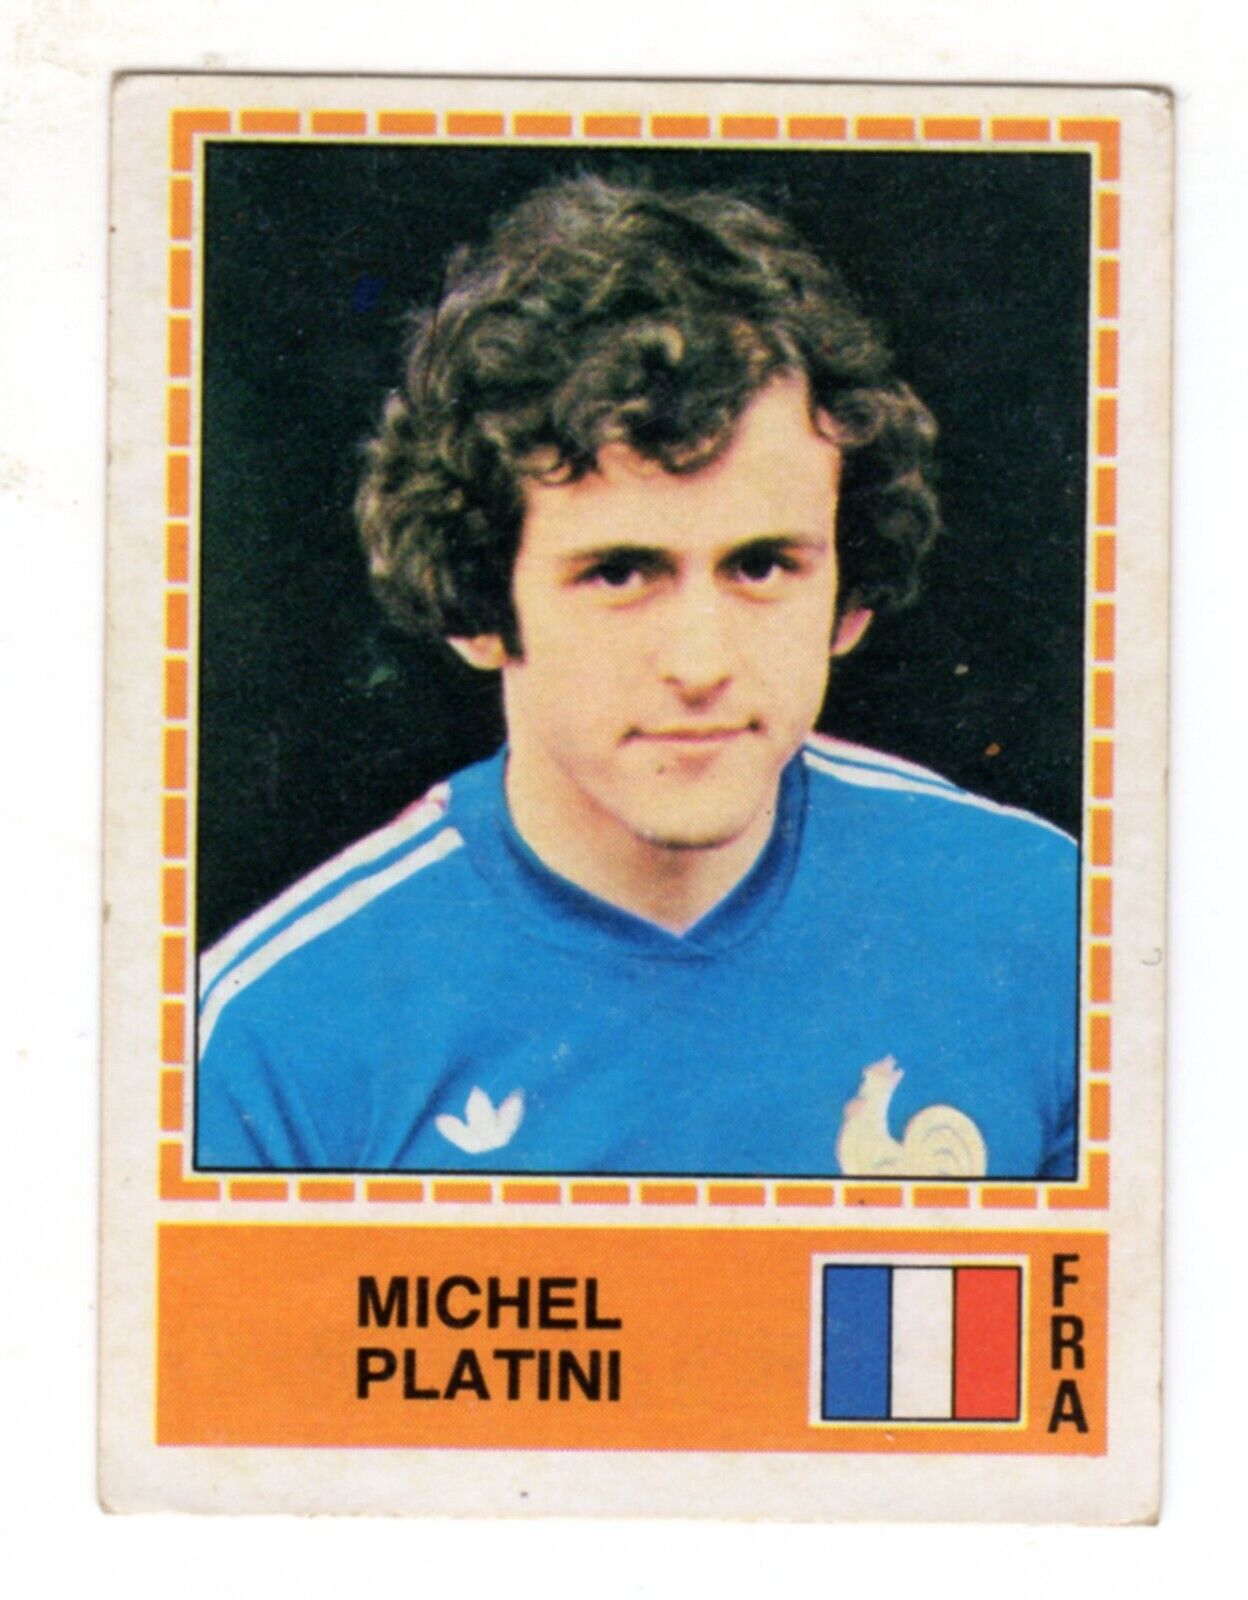 MICHEL PLATINI - FRANCE - CHOOSE YOUR TRADING CARD OR STICKER